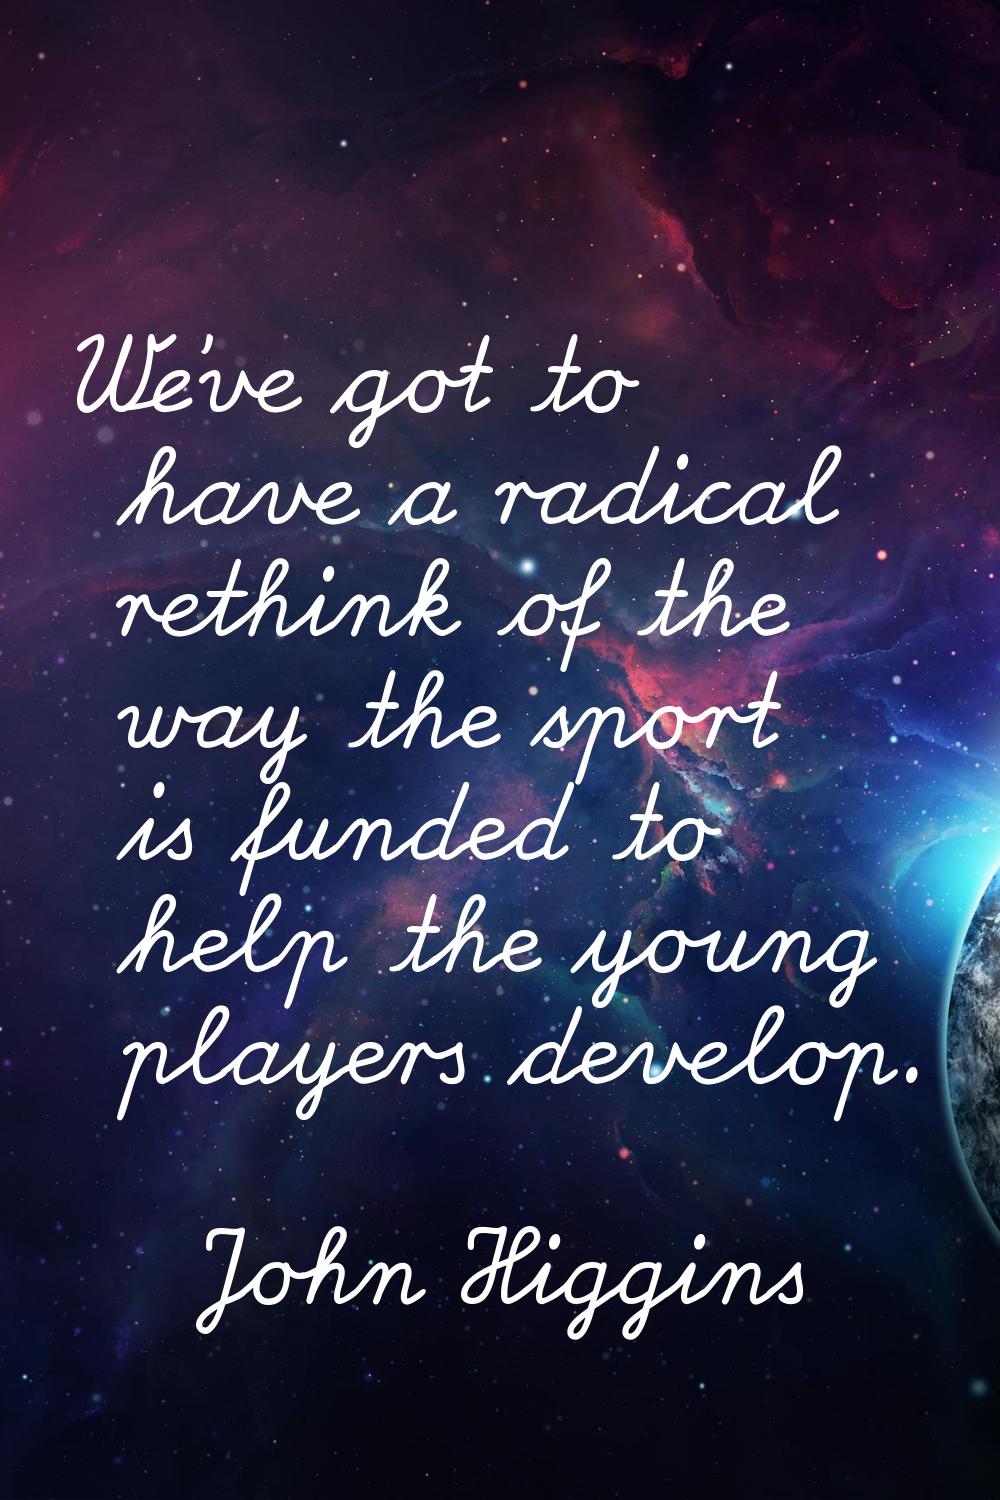 We've got to have a radical rethink of the way the sport is funded to help the young players develo